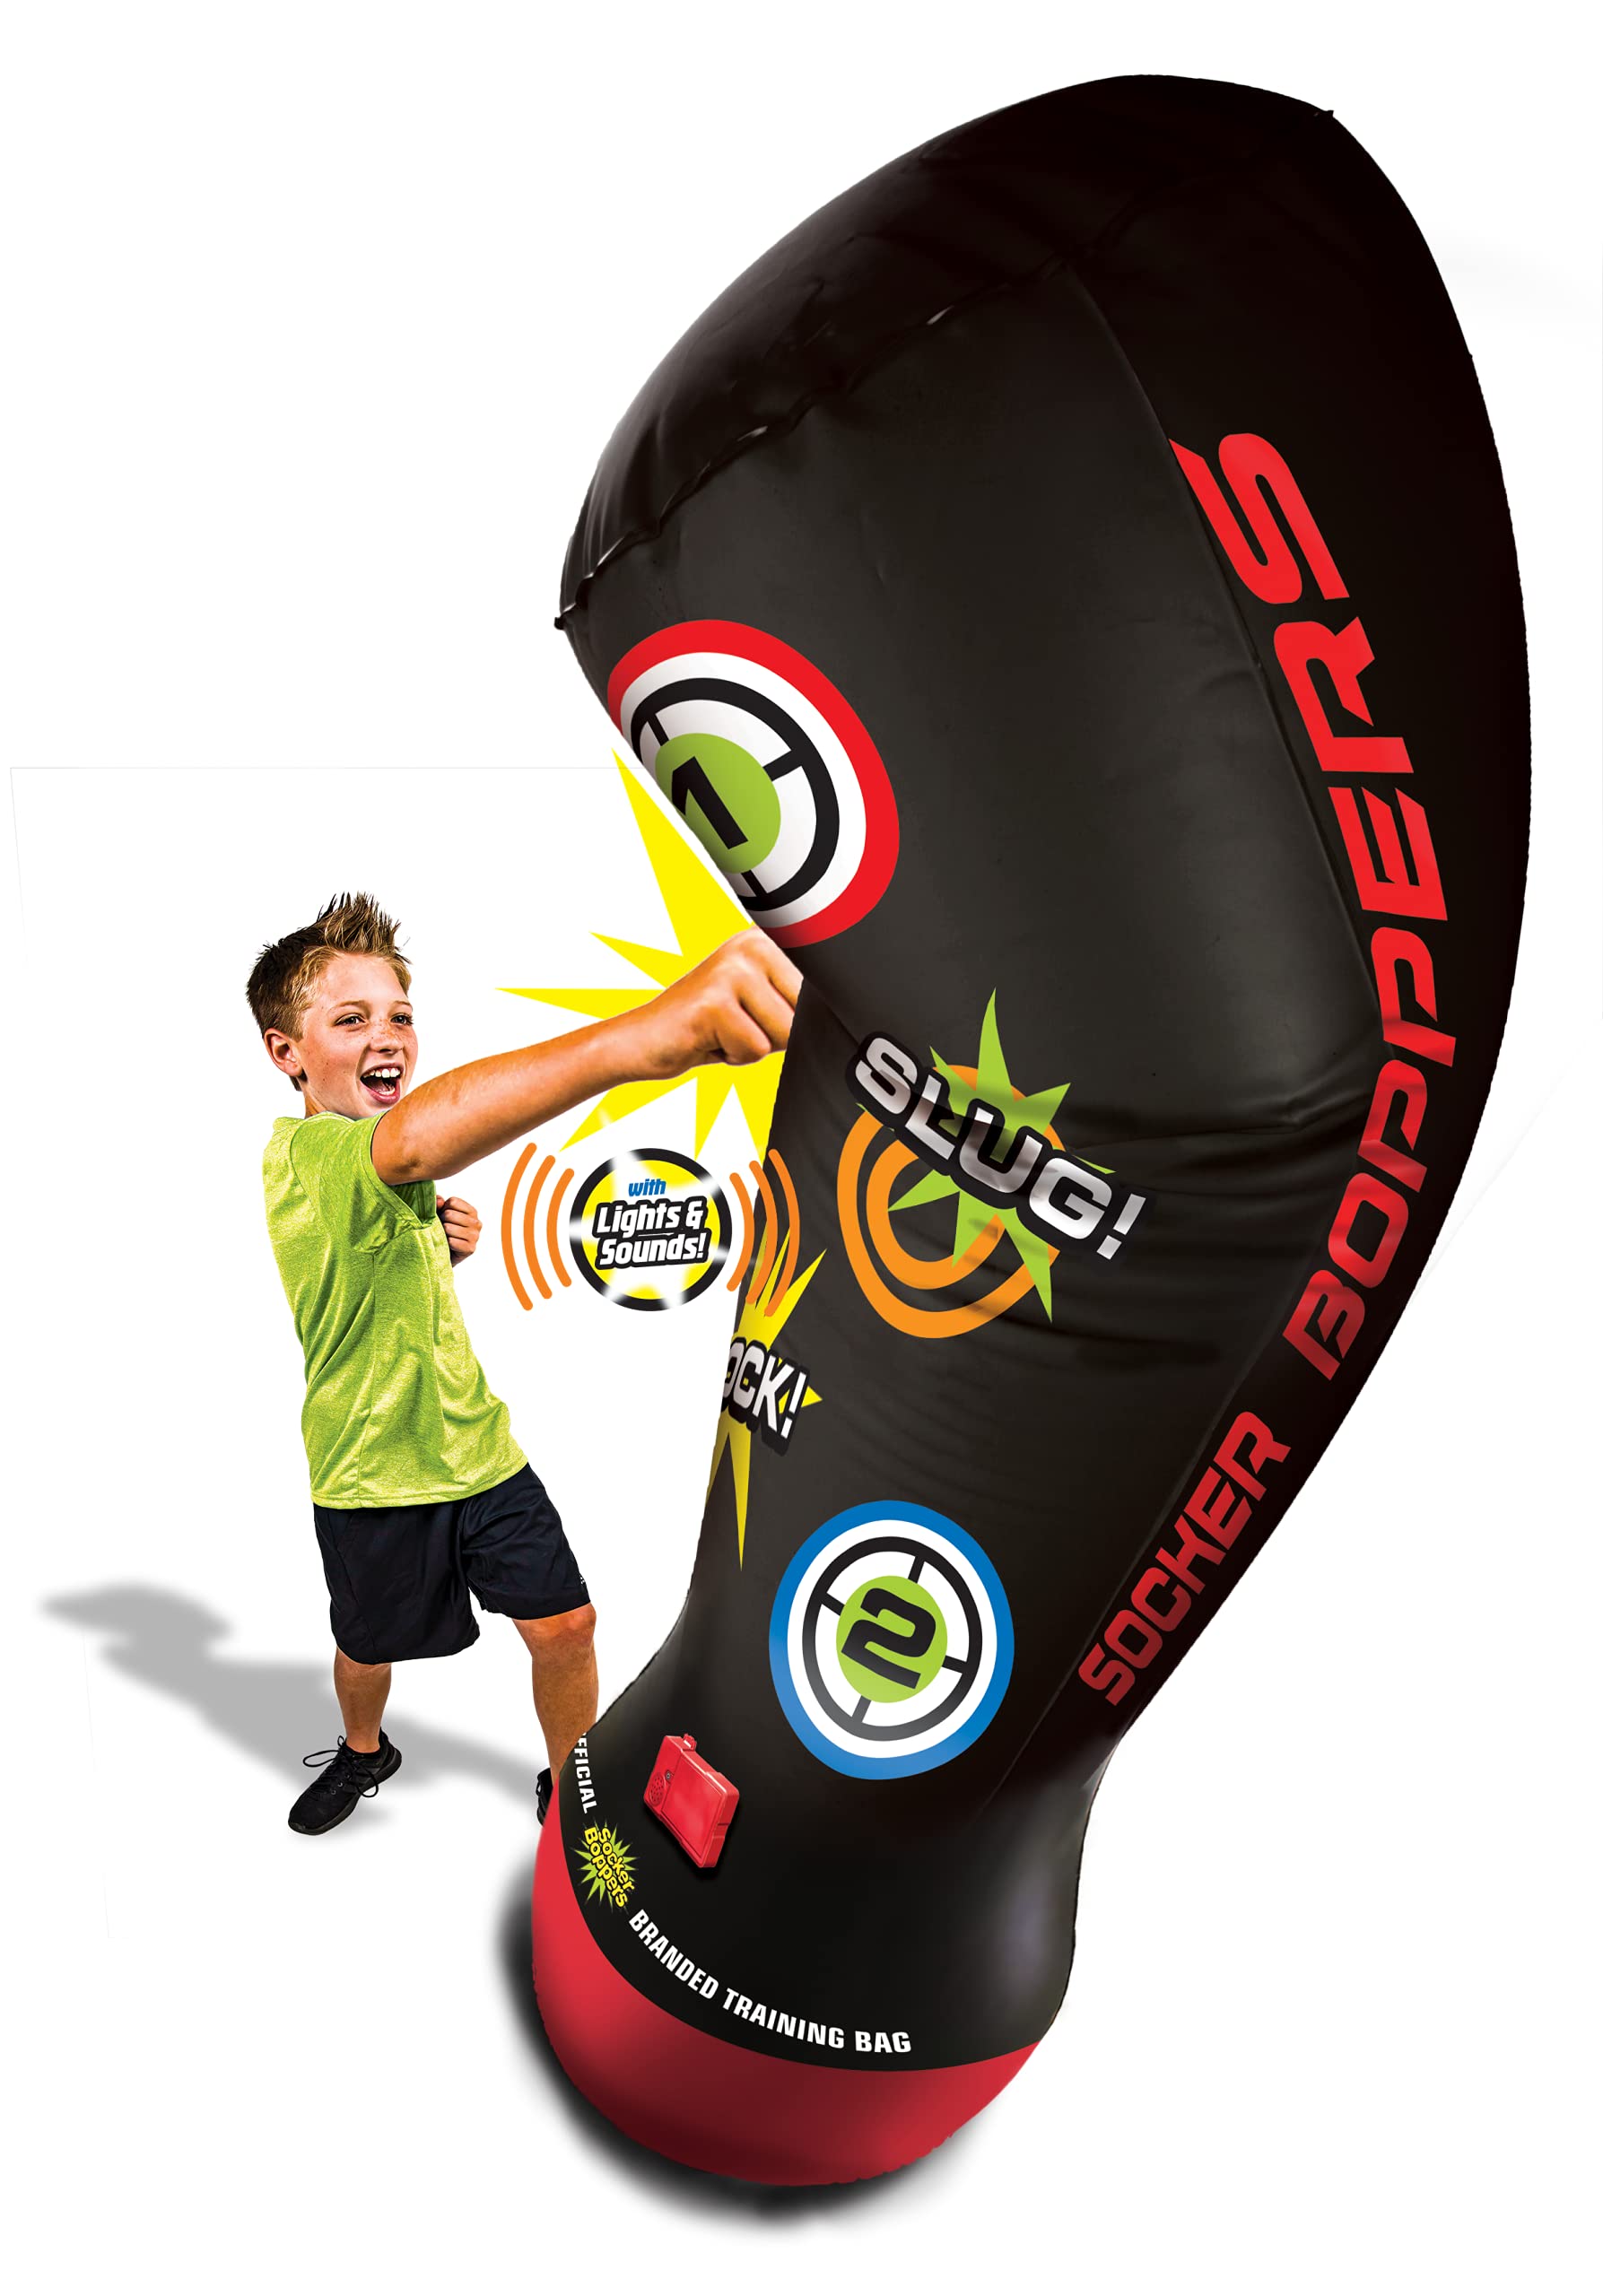 Socker Boppers Electronic Bop Bag, Inflatable Punching/Kickboxing Bag with Lights and Sound, Sock it, Bop it, Punch it, Safe Fun in or Outdoors, Develops Agility-Balance-Coordination-Athletic Ability